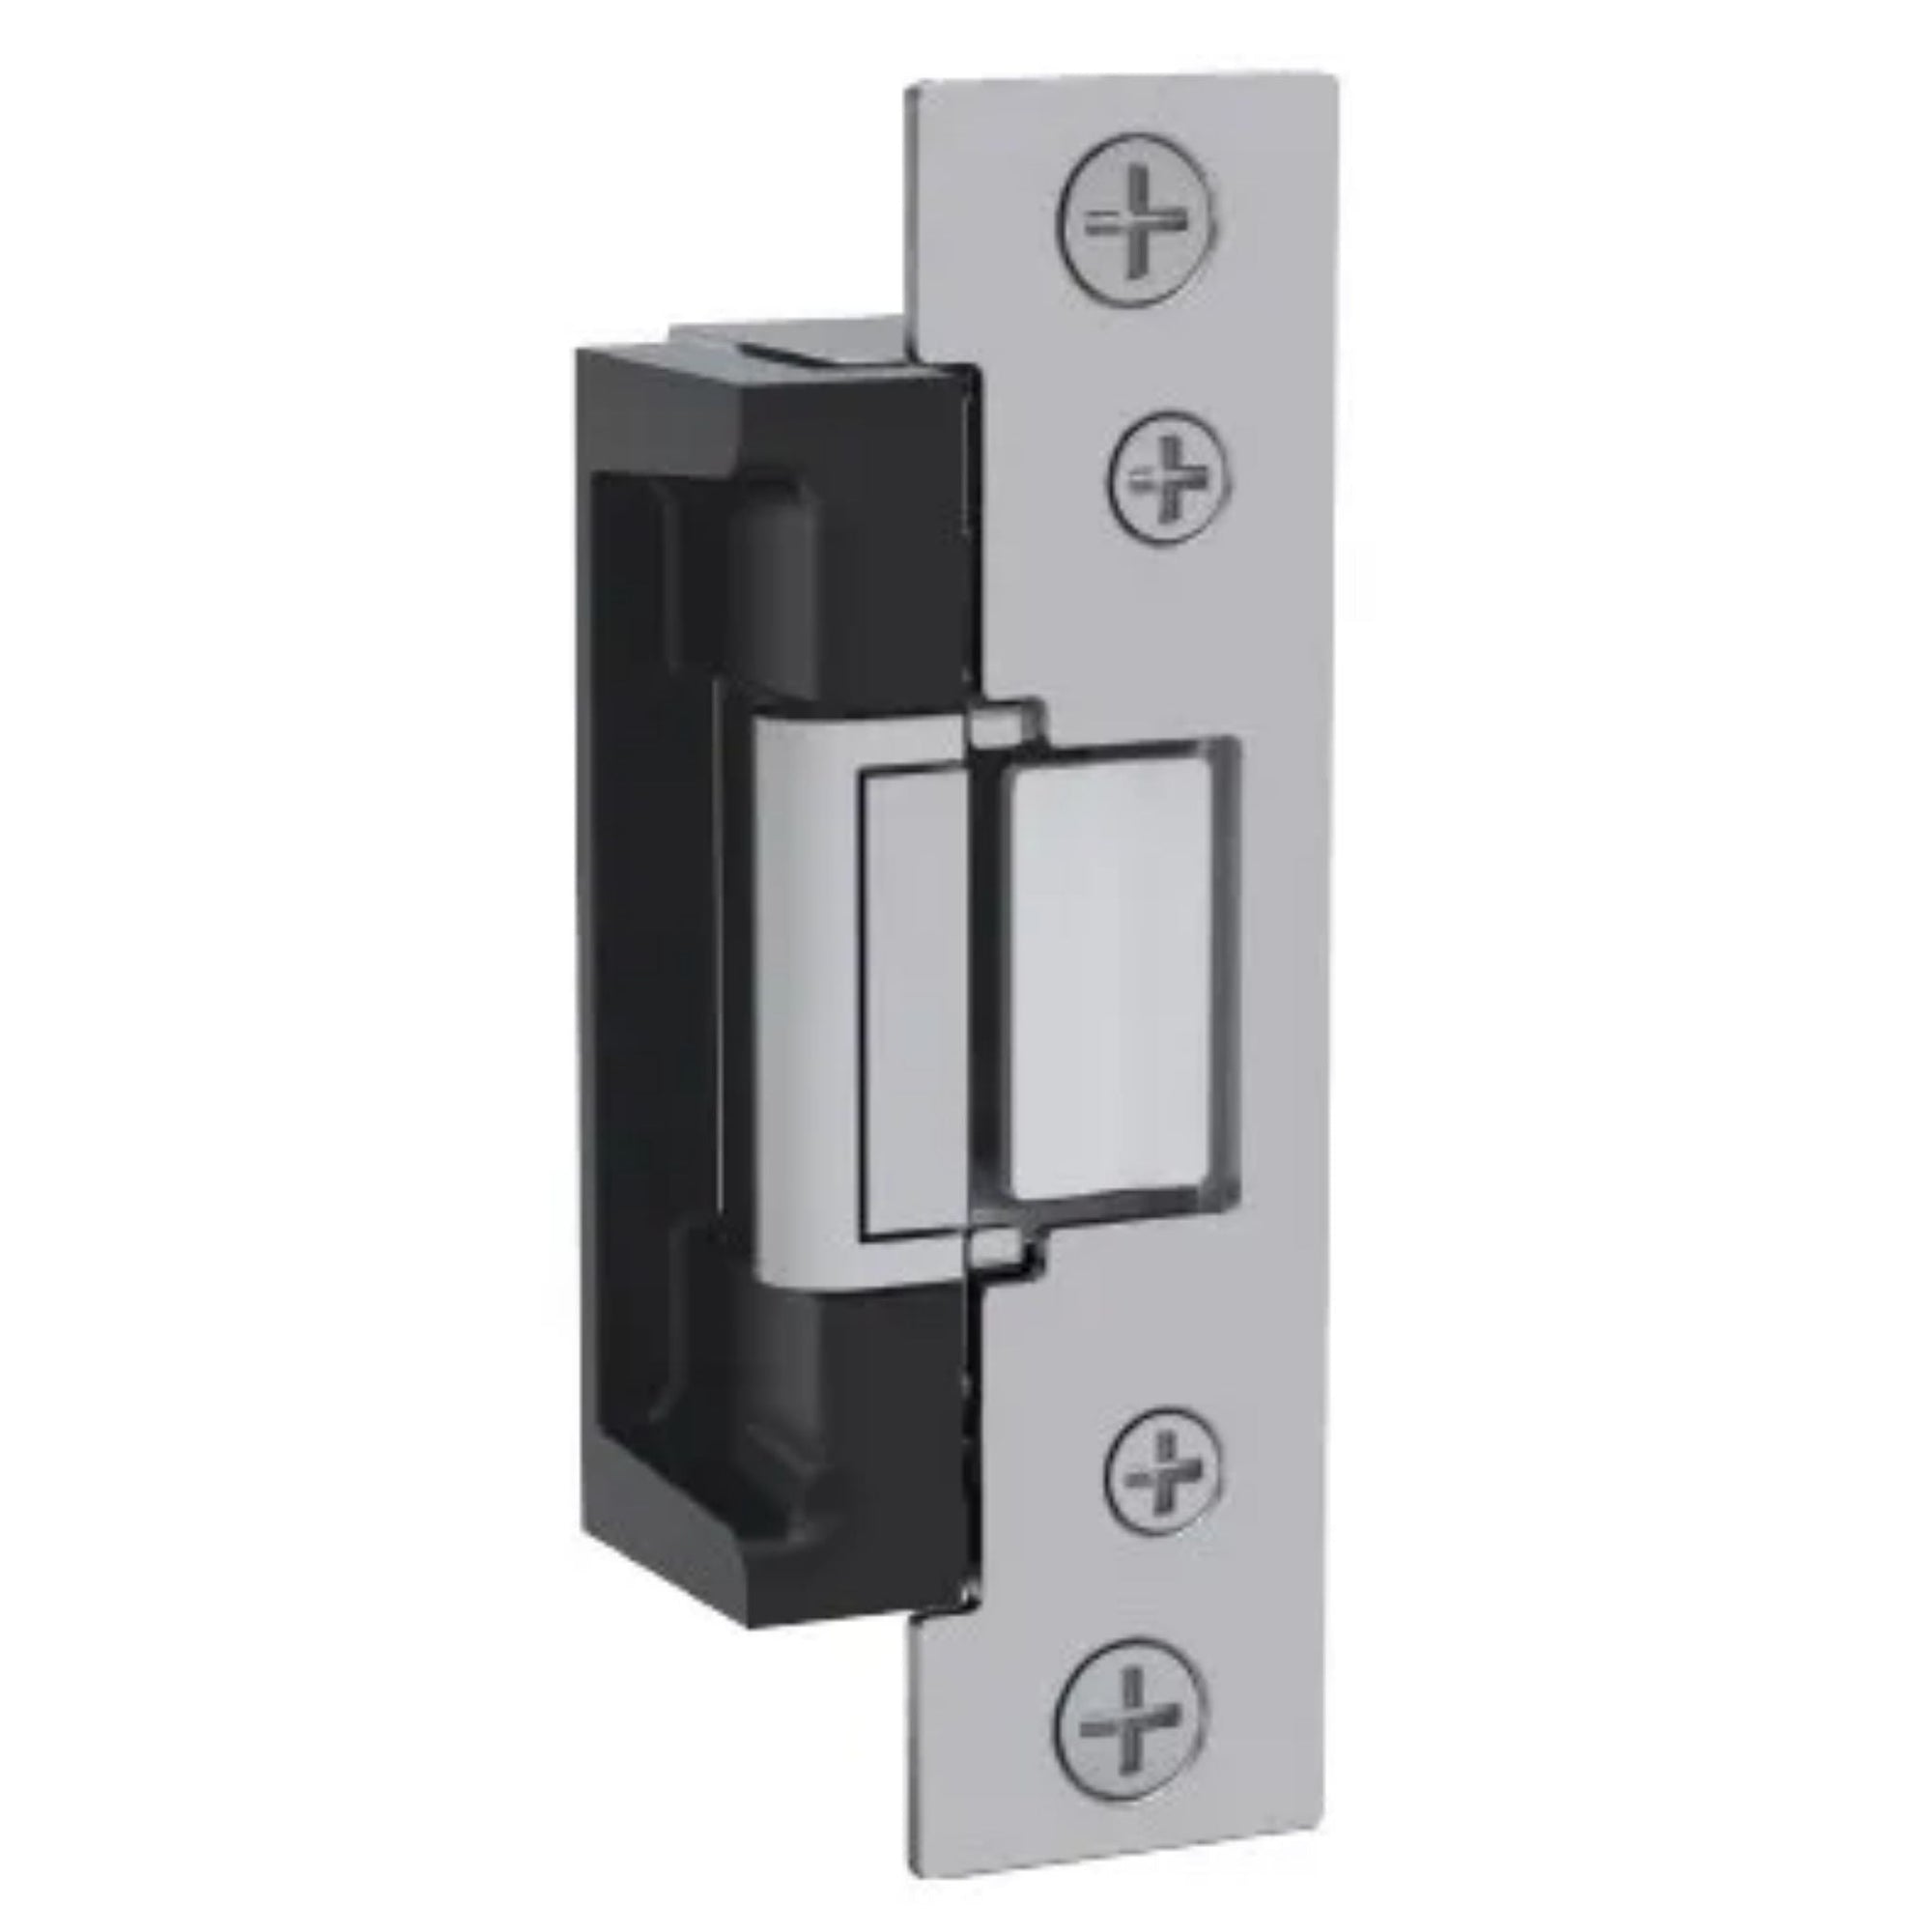 HES 7000 Series Electric Strike Offers Two Options for Doors with Preloaded Conditions Works with Cylindrical or Rim Exit Latch Bolts - The Lock Source